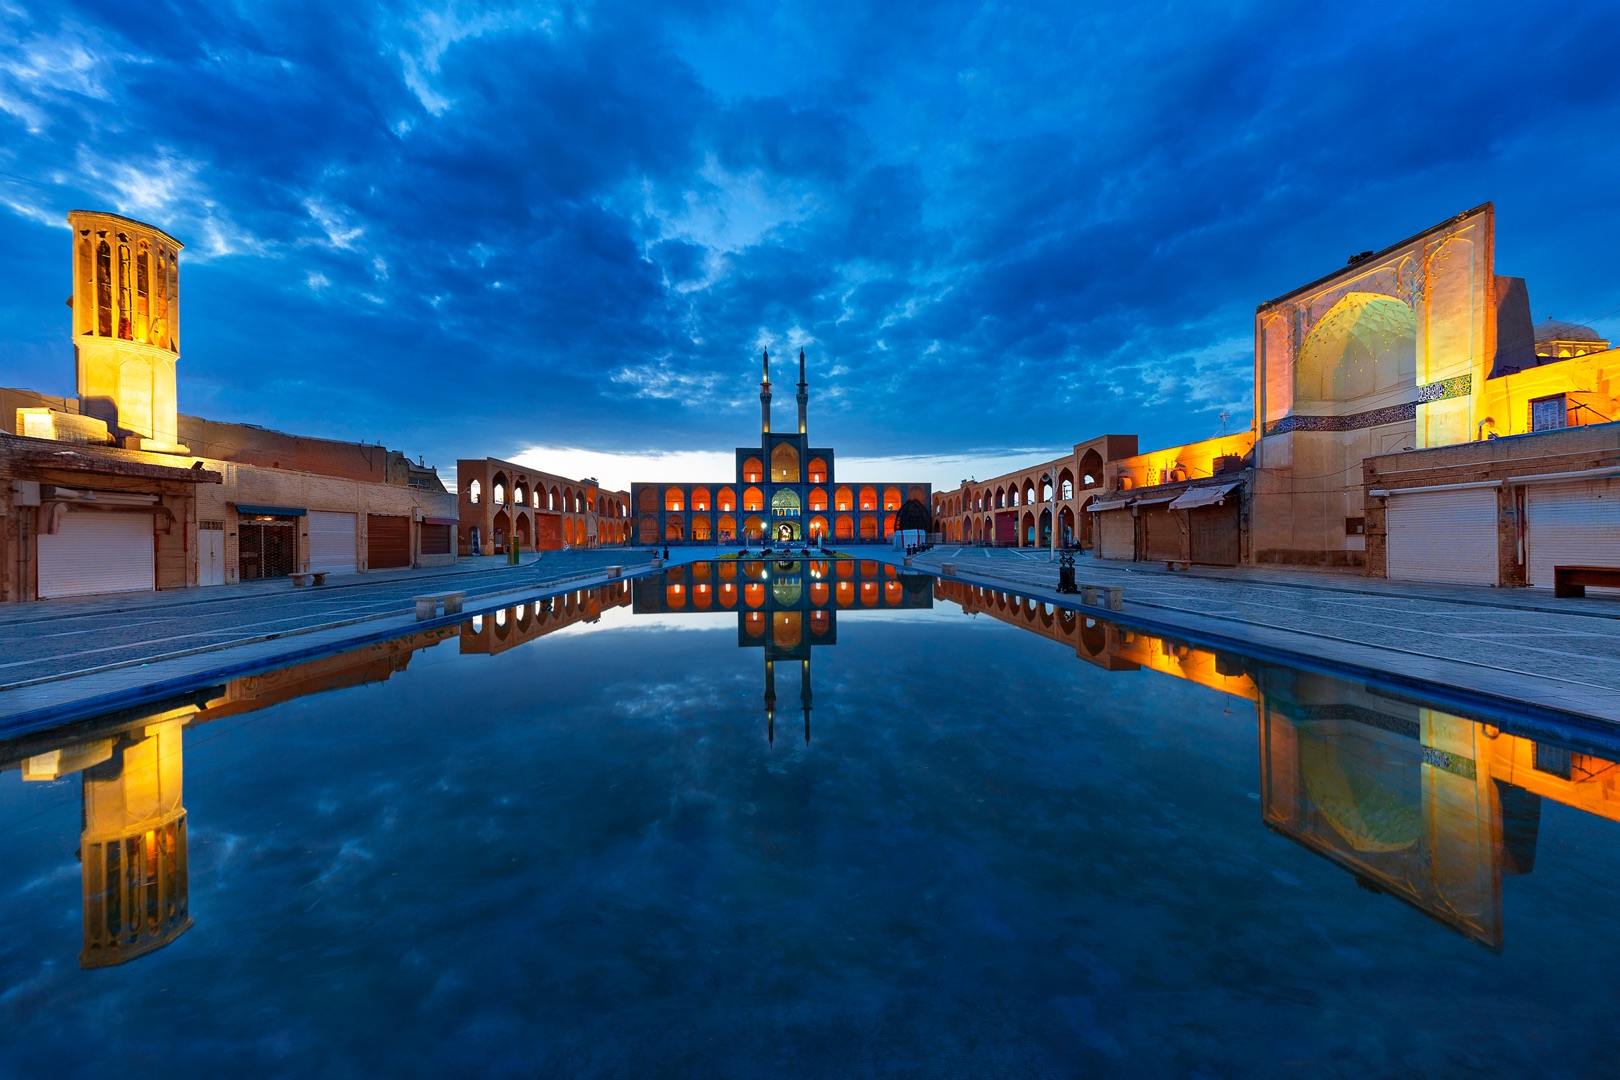 Explore Yazd's timeless beauty and ancient history